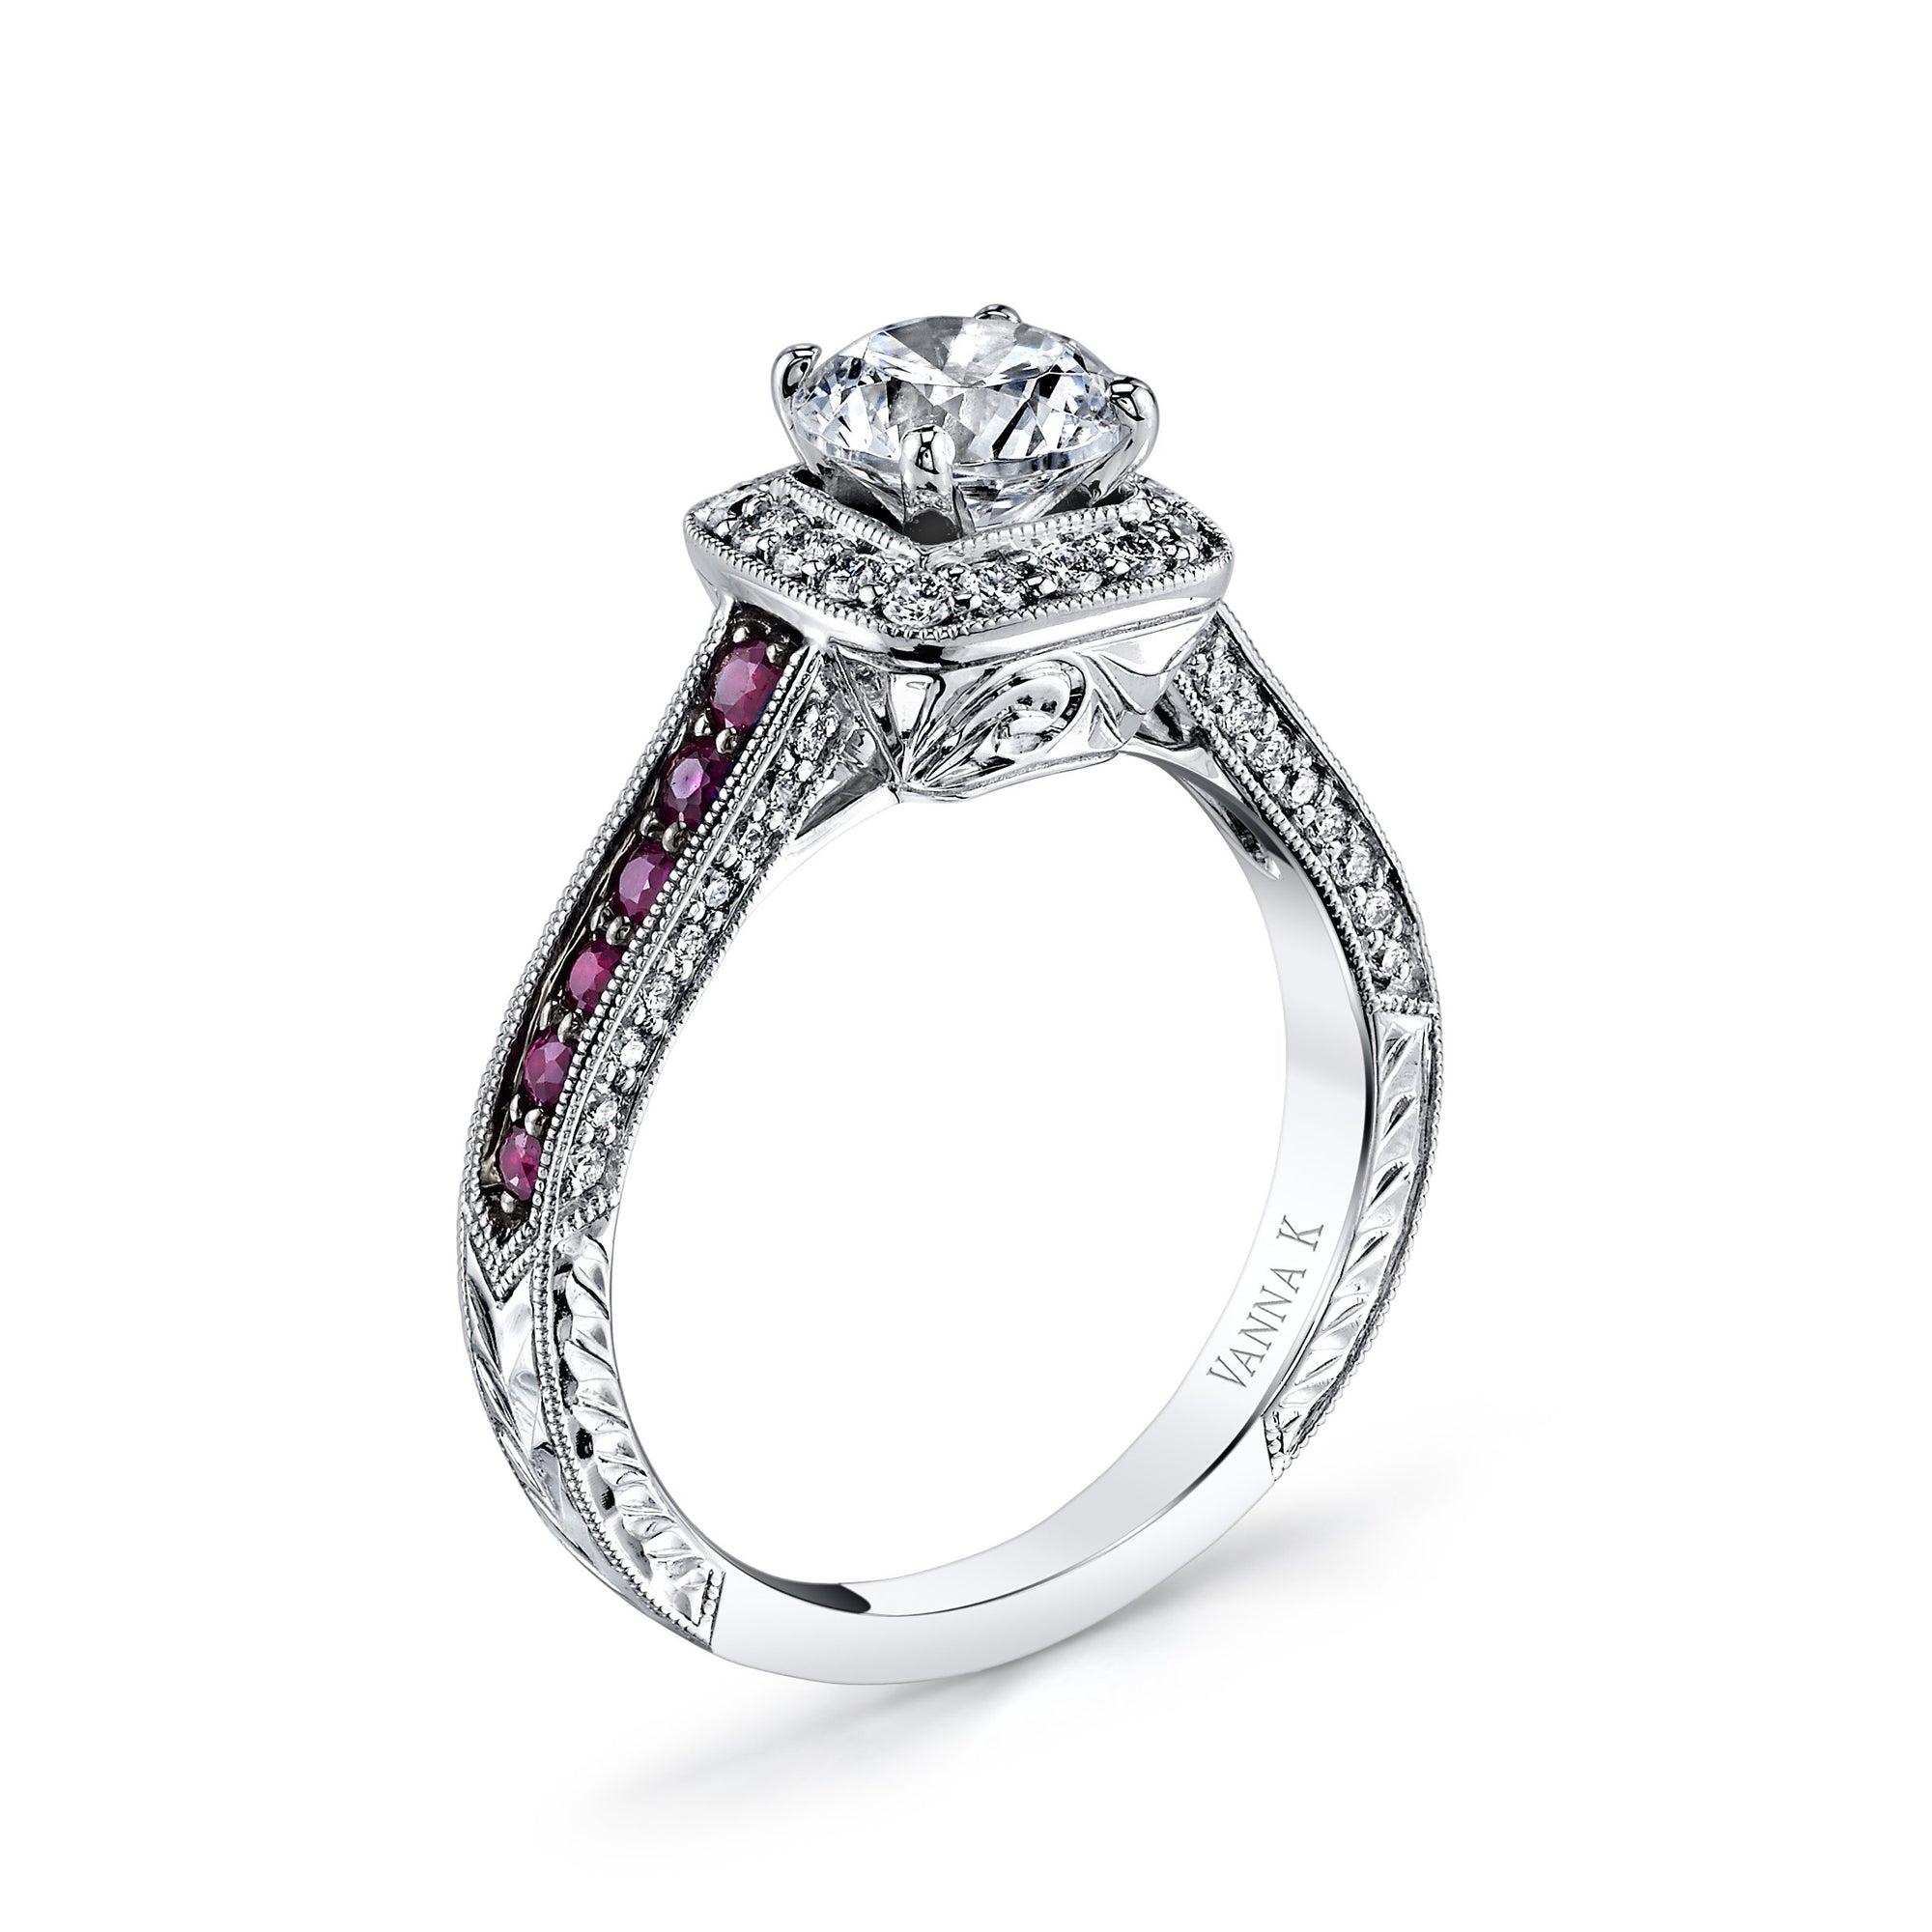 18K White Gold Halo Diamond And Ruby Engagement Ring